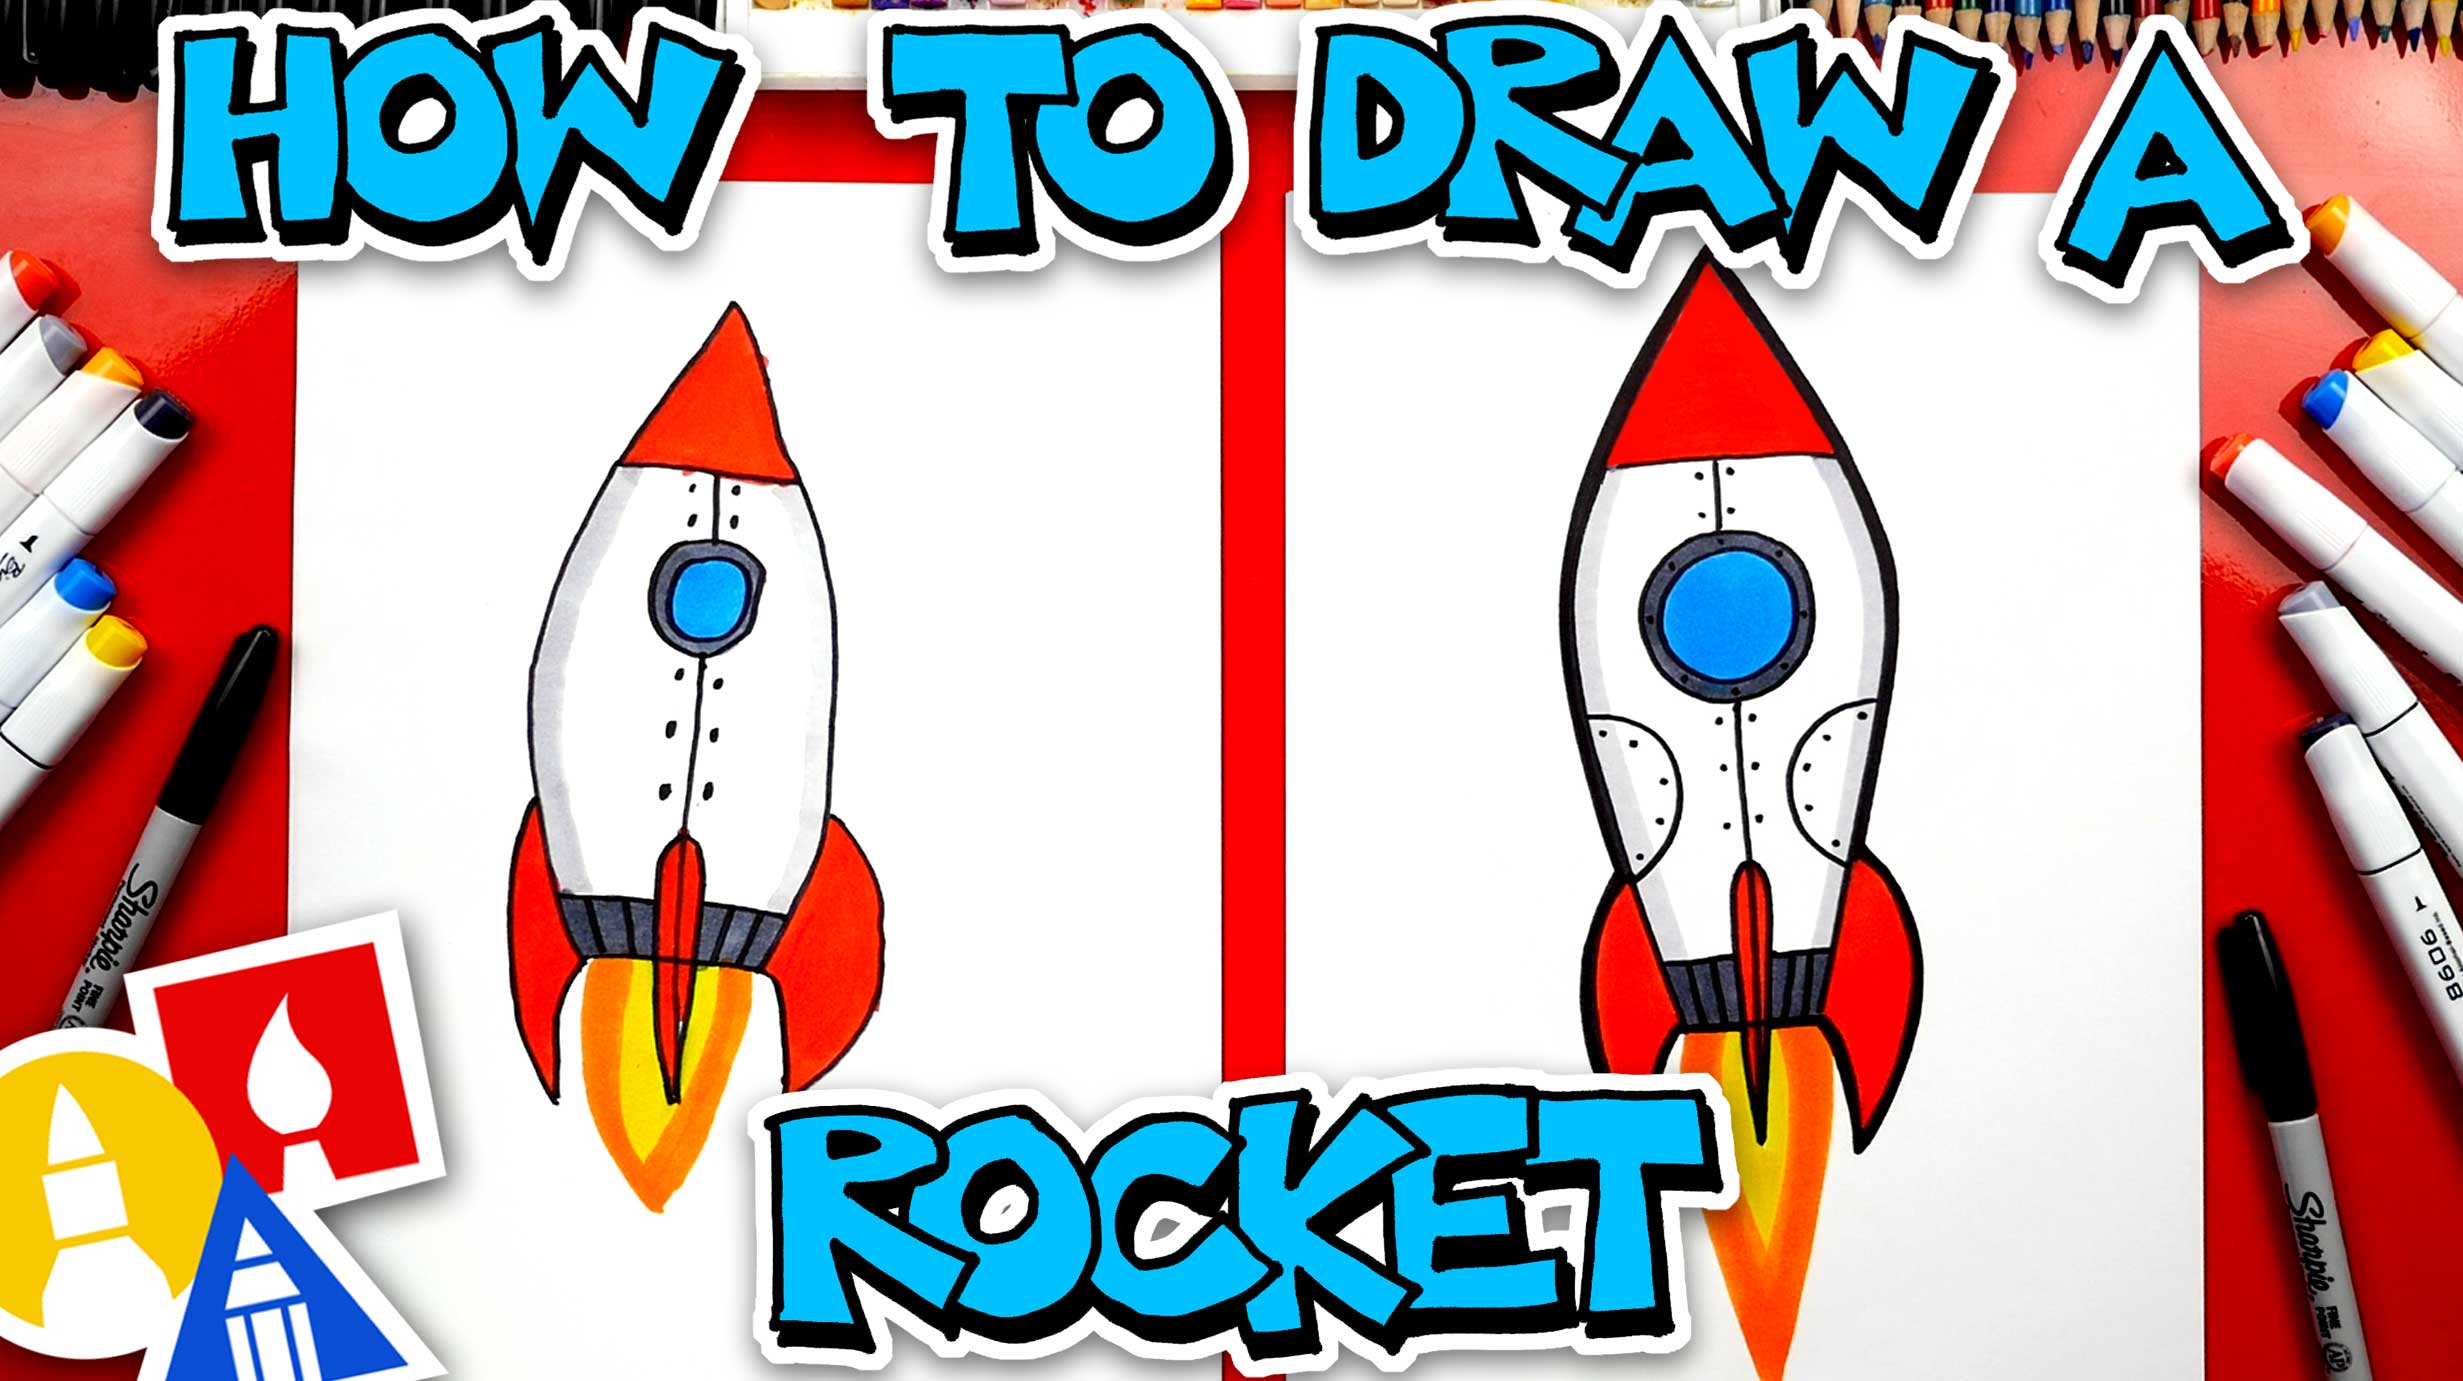 How To Draw A Rocket Ship - Art For Kids Hub 